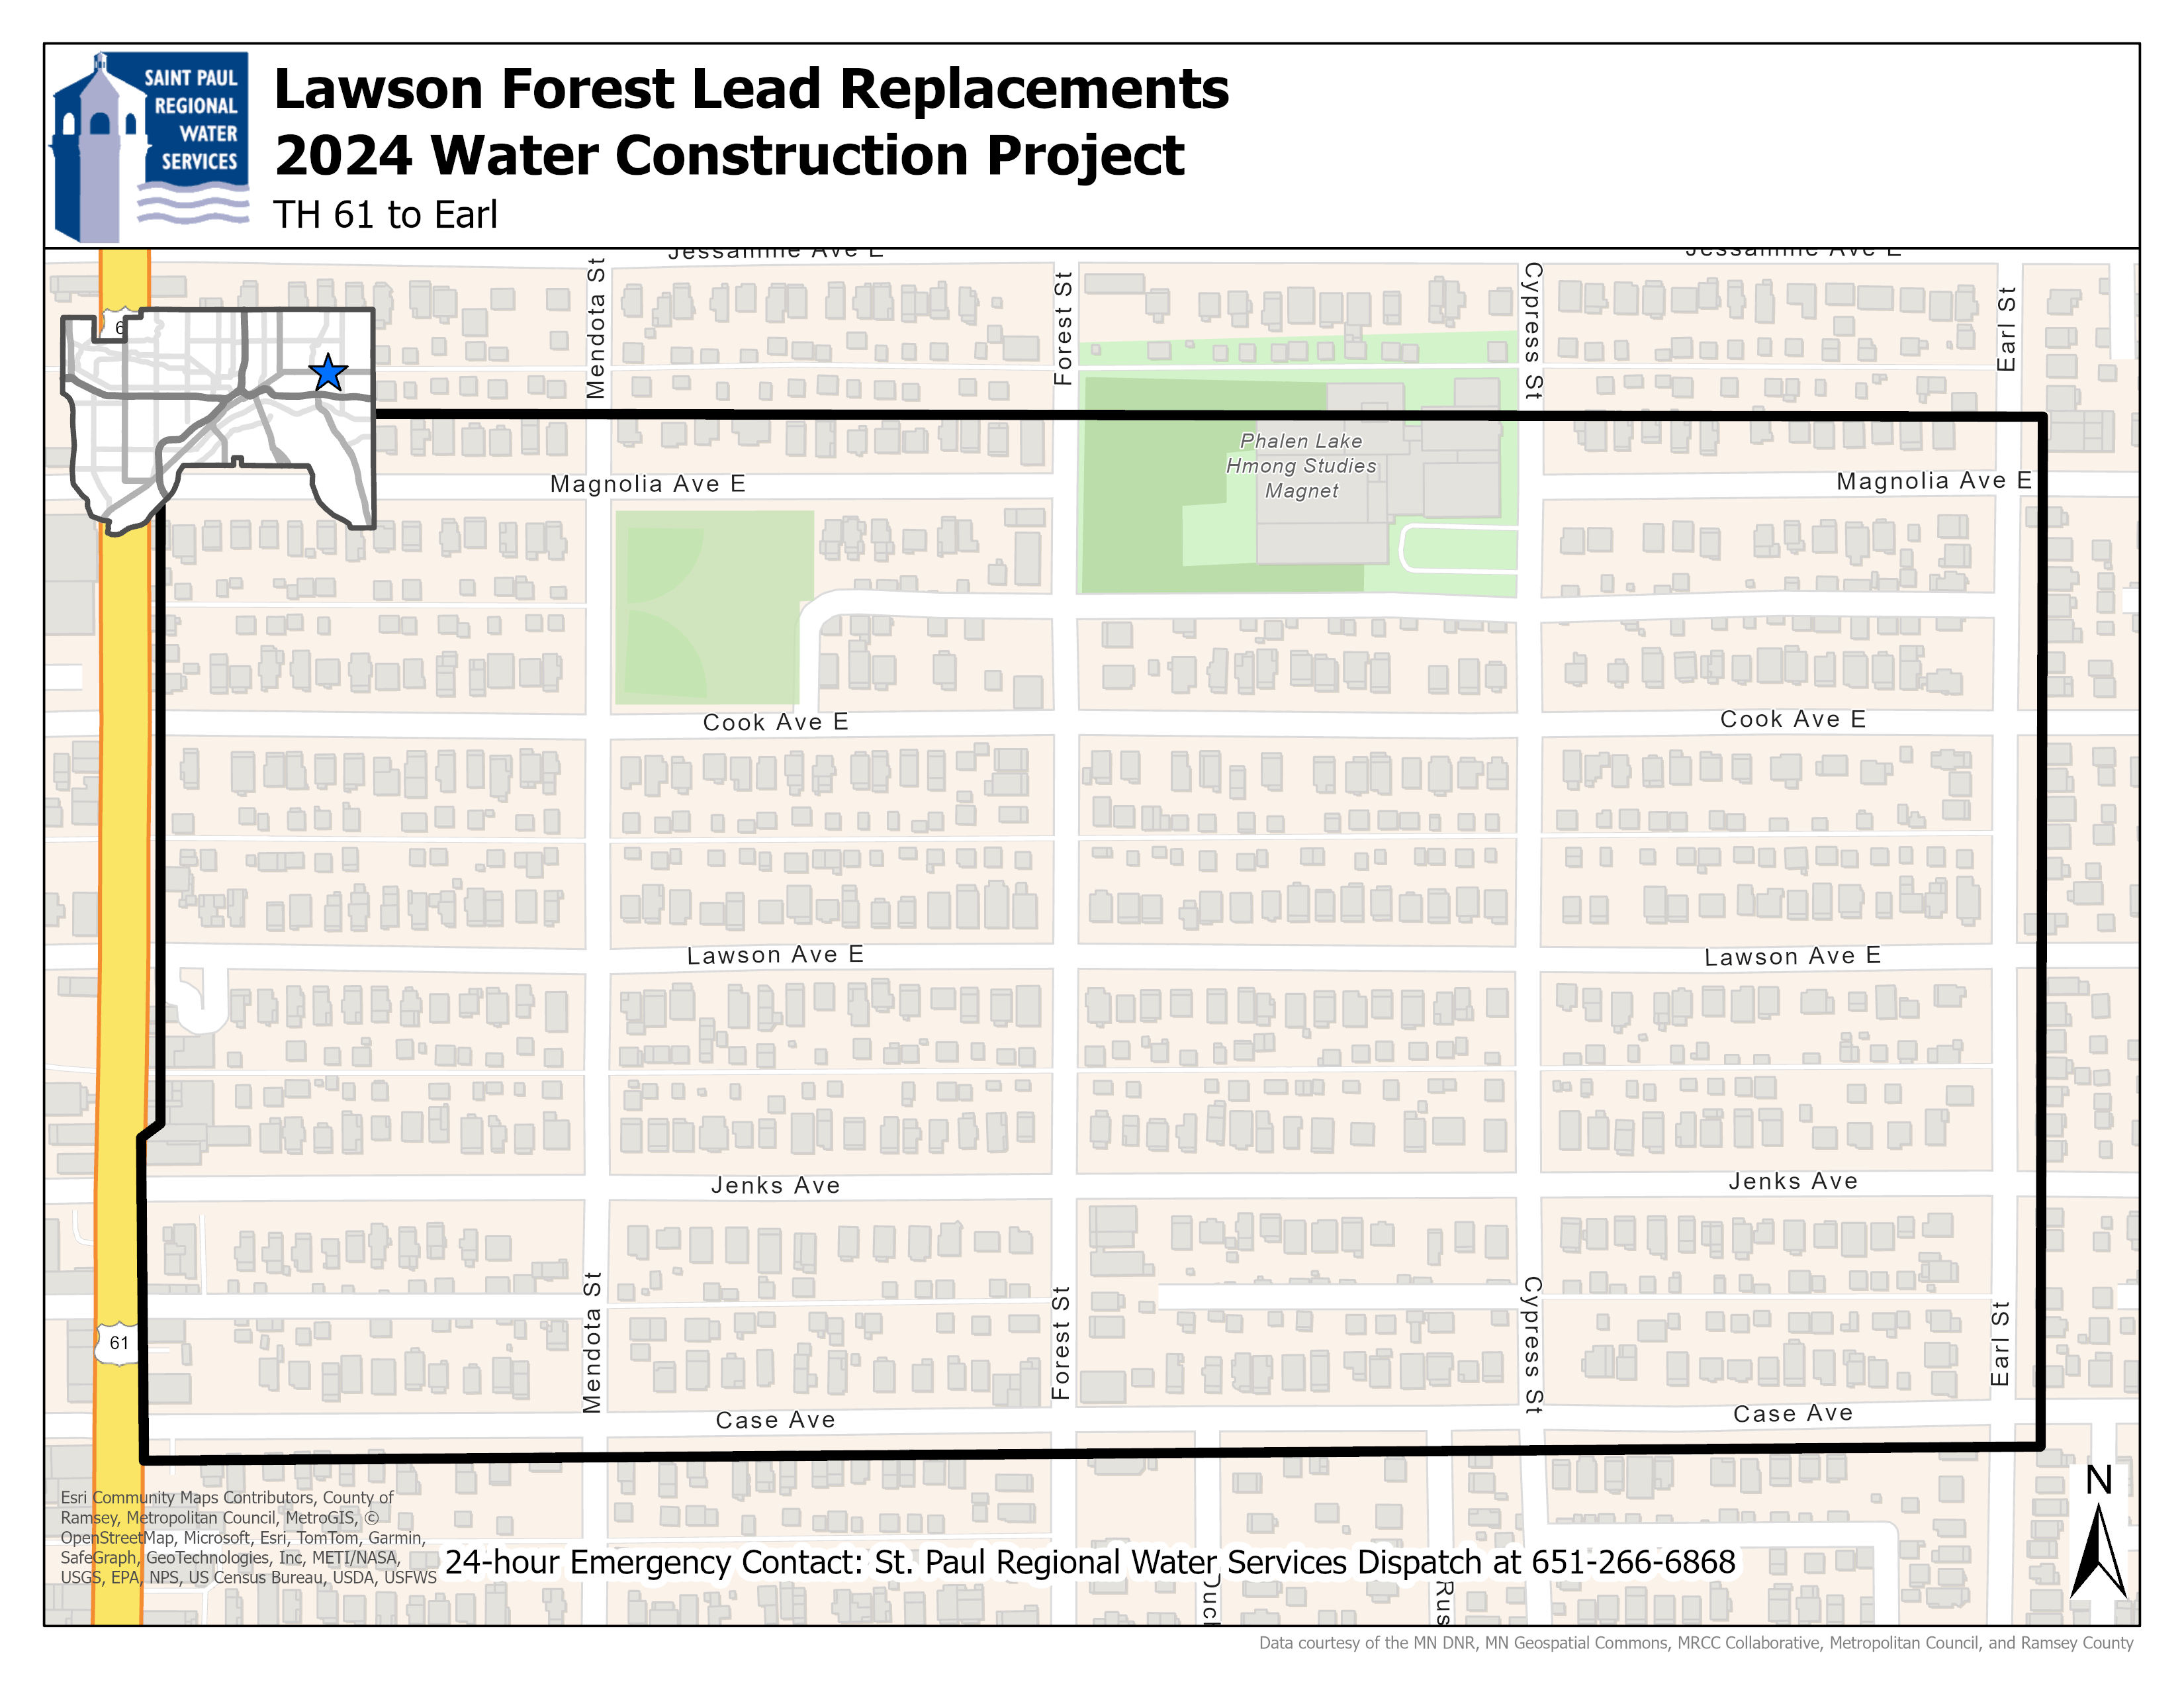 Map outlining Lawson-Forest project area